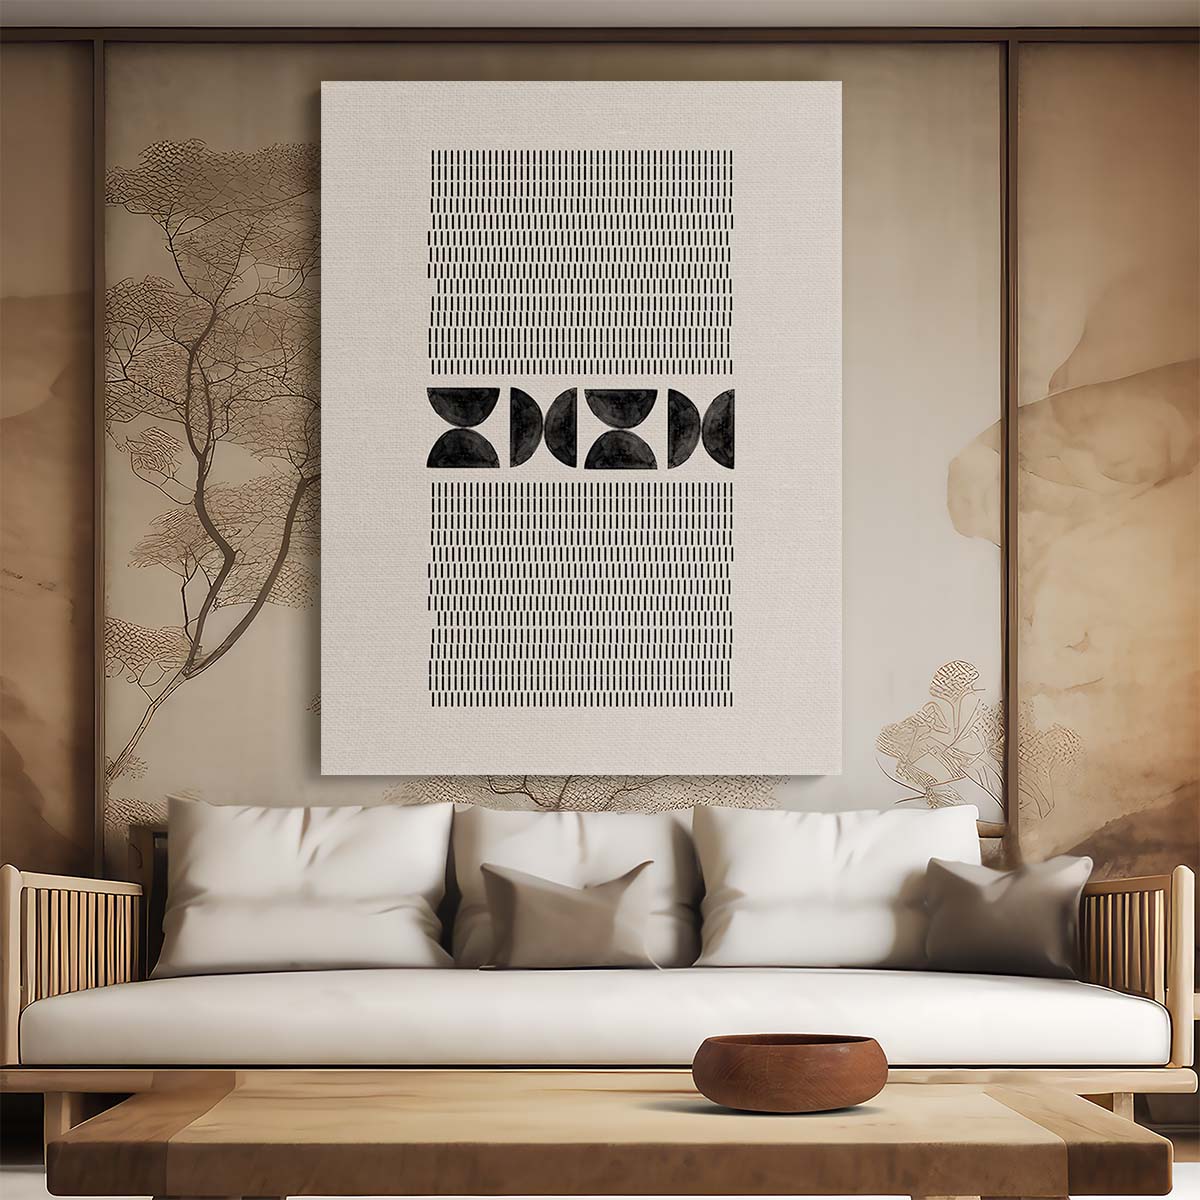 Geometric Beige Abstract Illustration Art by THE MIUUS STUDIO by Luxuriance Designs, made in USA